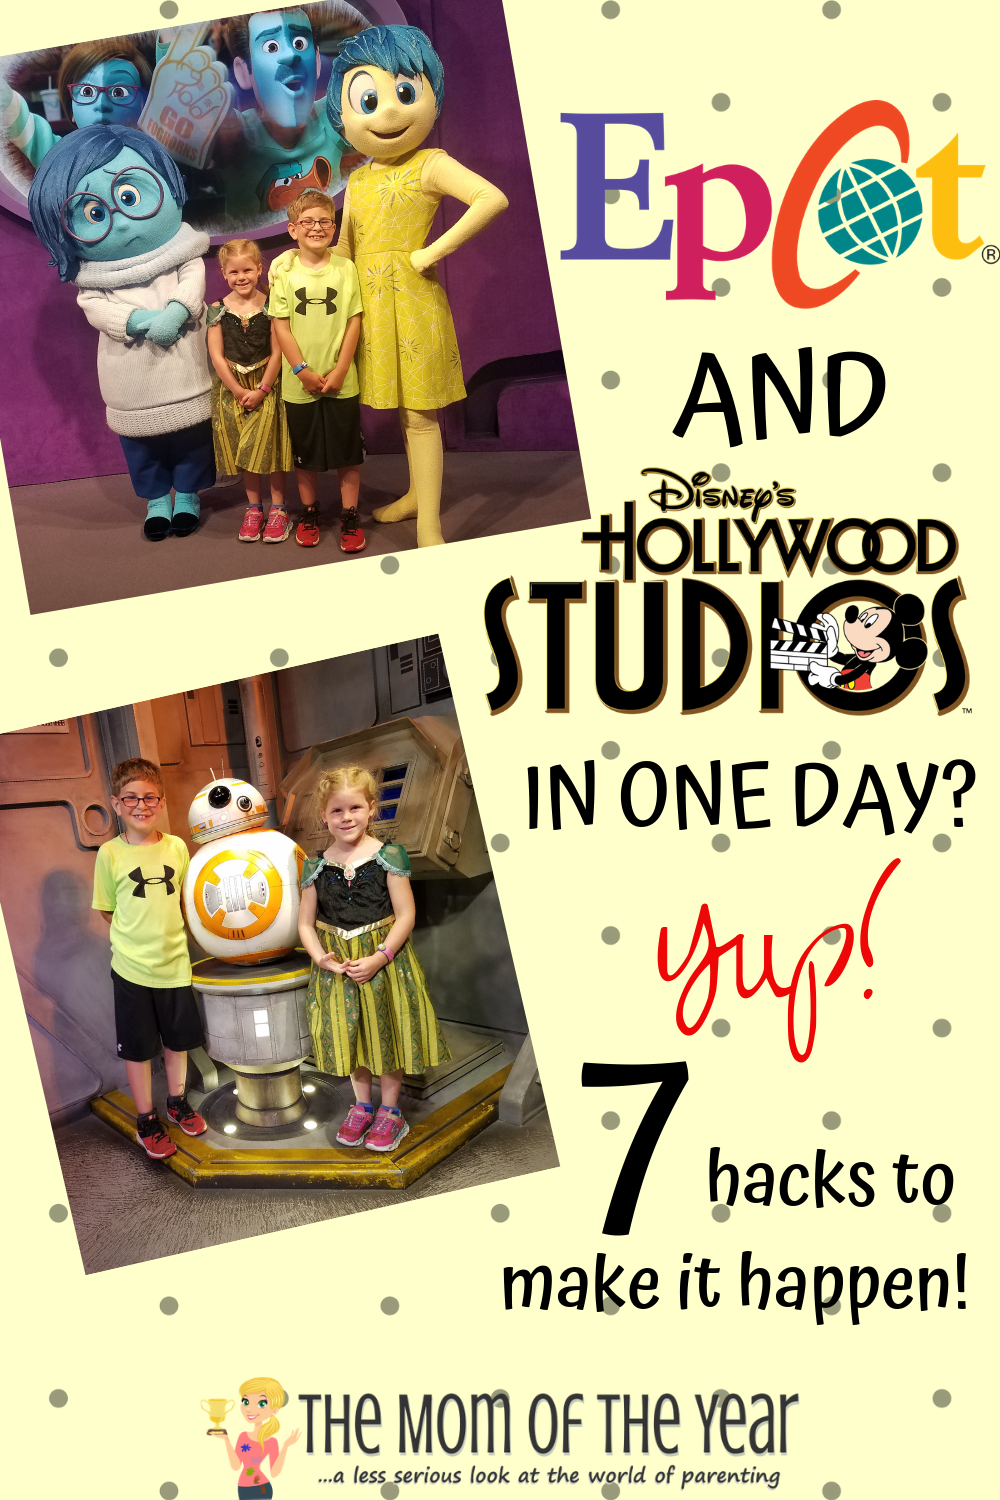 6 Hacks for Visiting Epcot and Hollywood Studios in One Day The Mom